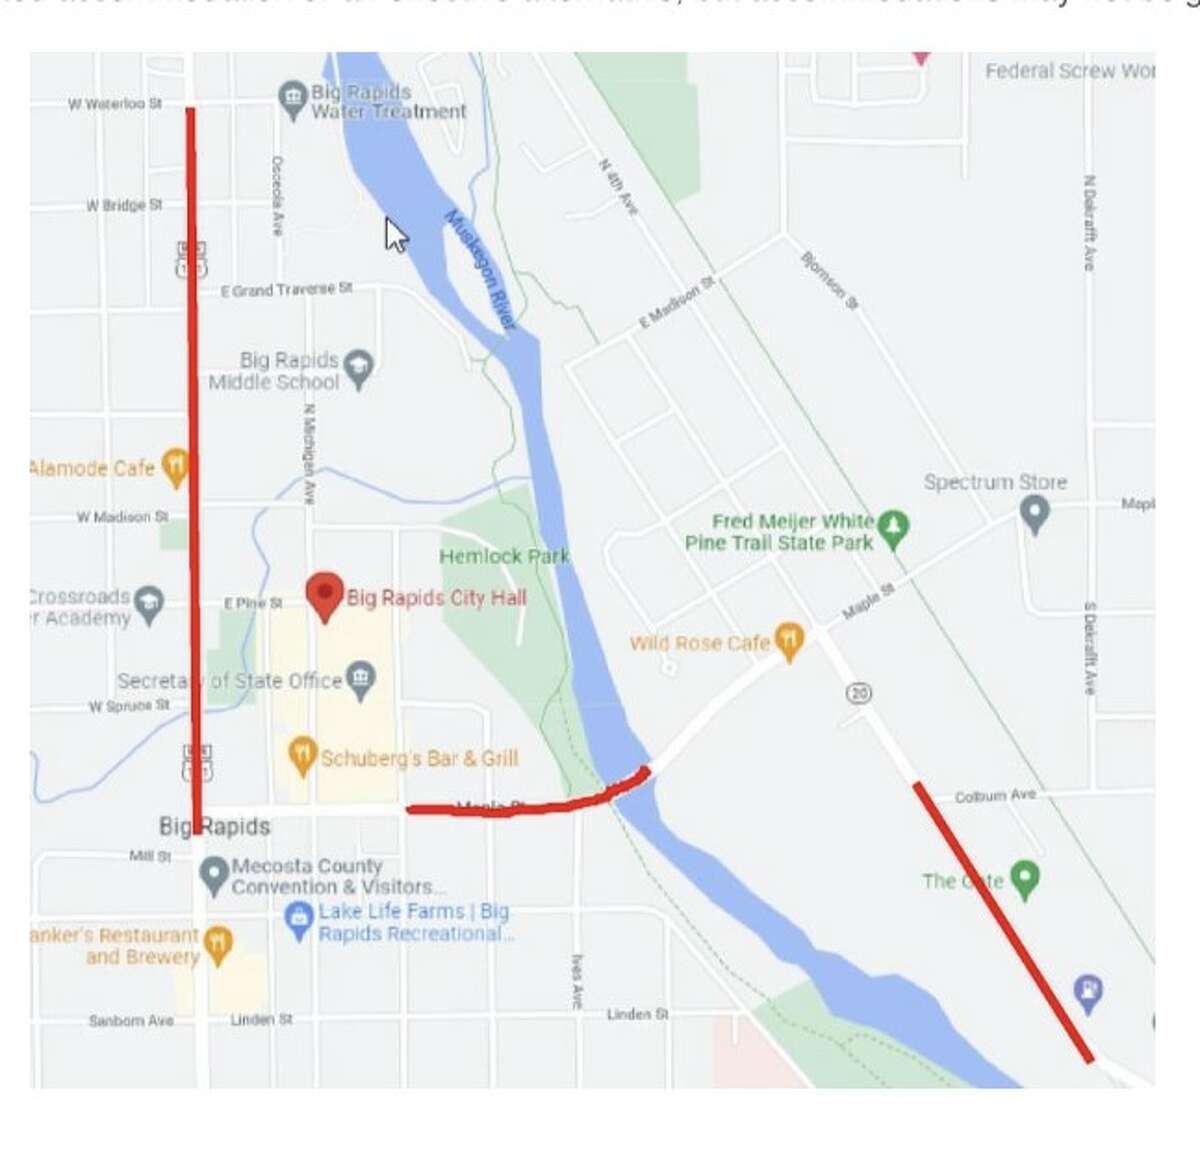 The red areas on the map indicated the sections of street MDOT has proposed reconfiguring from four lanes to three lanes. A public meeting will be held April 19 to receive feedback on the proposed changes.